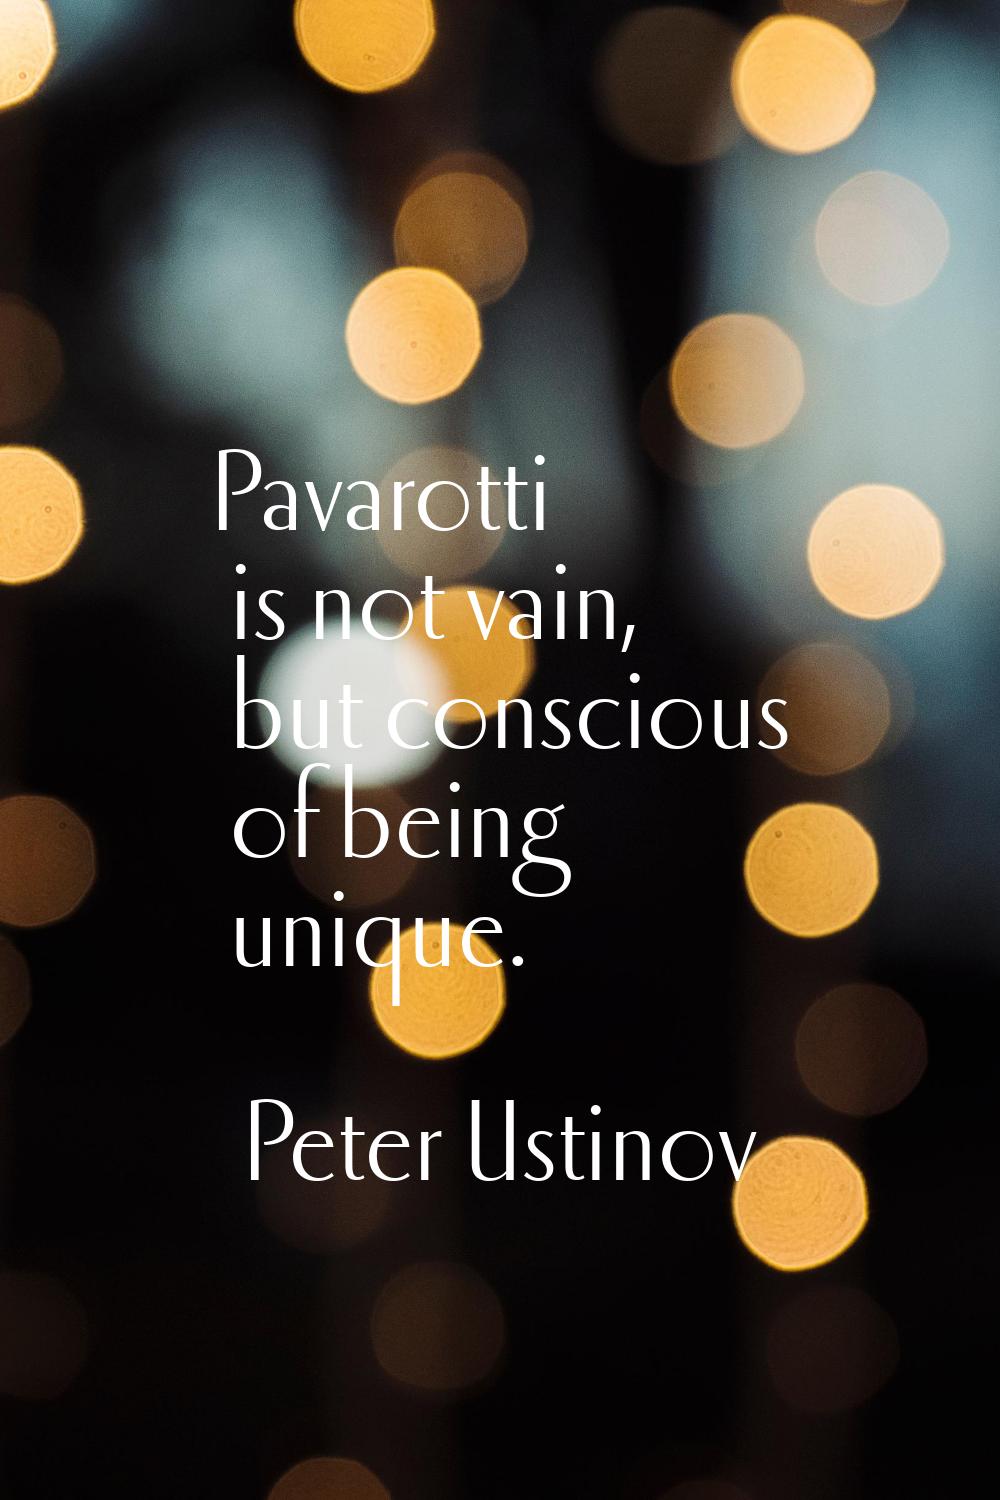 Pavarotti is not vain, but conscious of being unique.